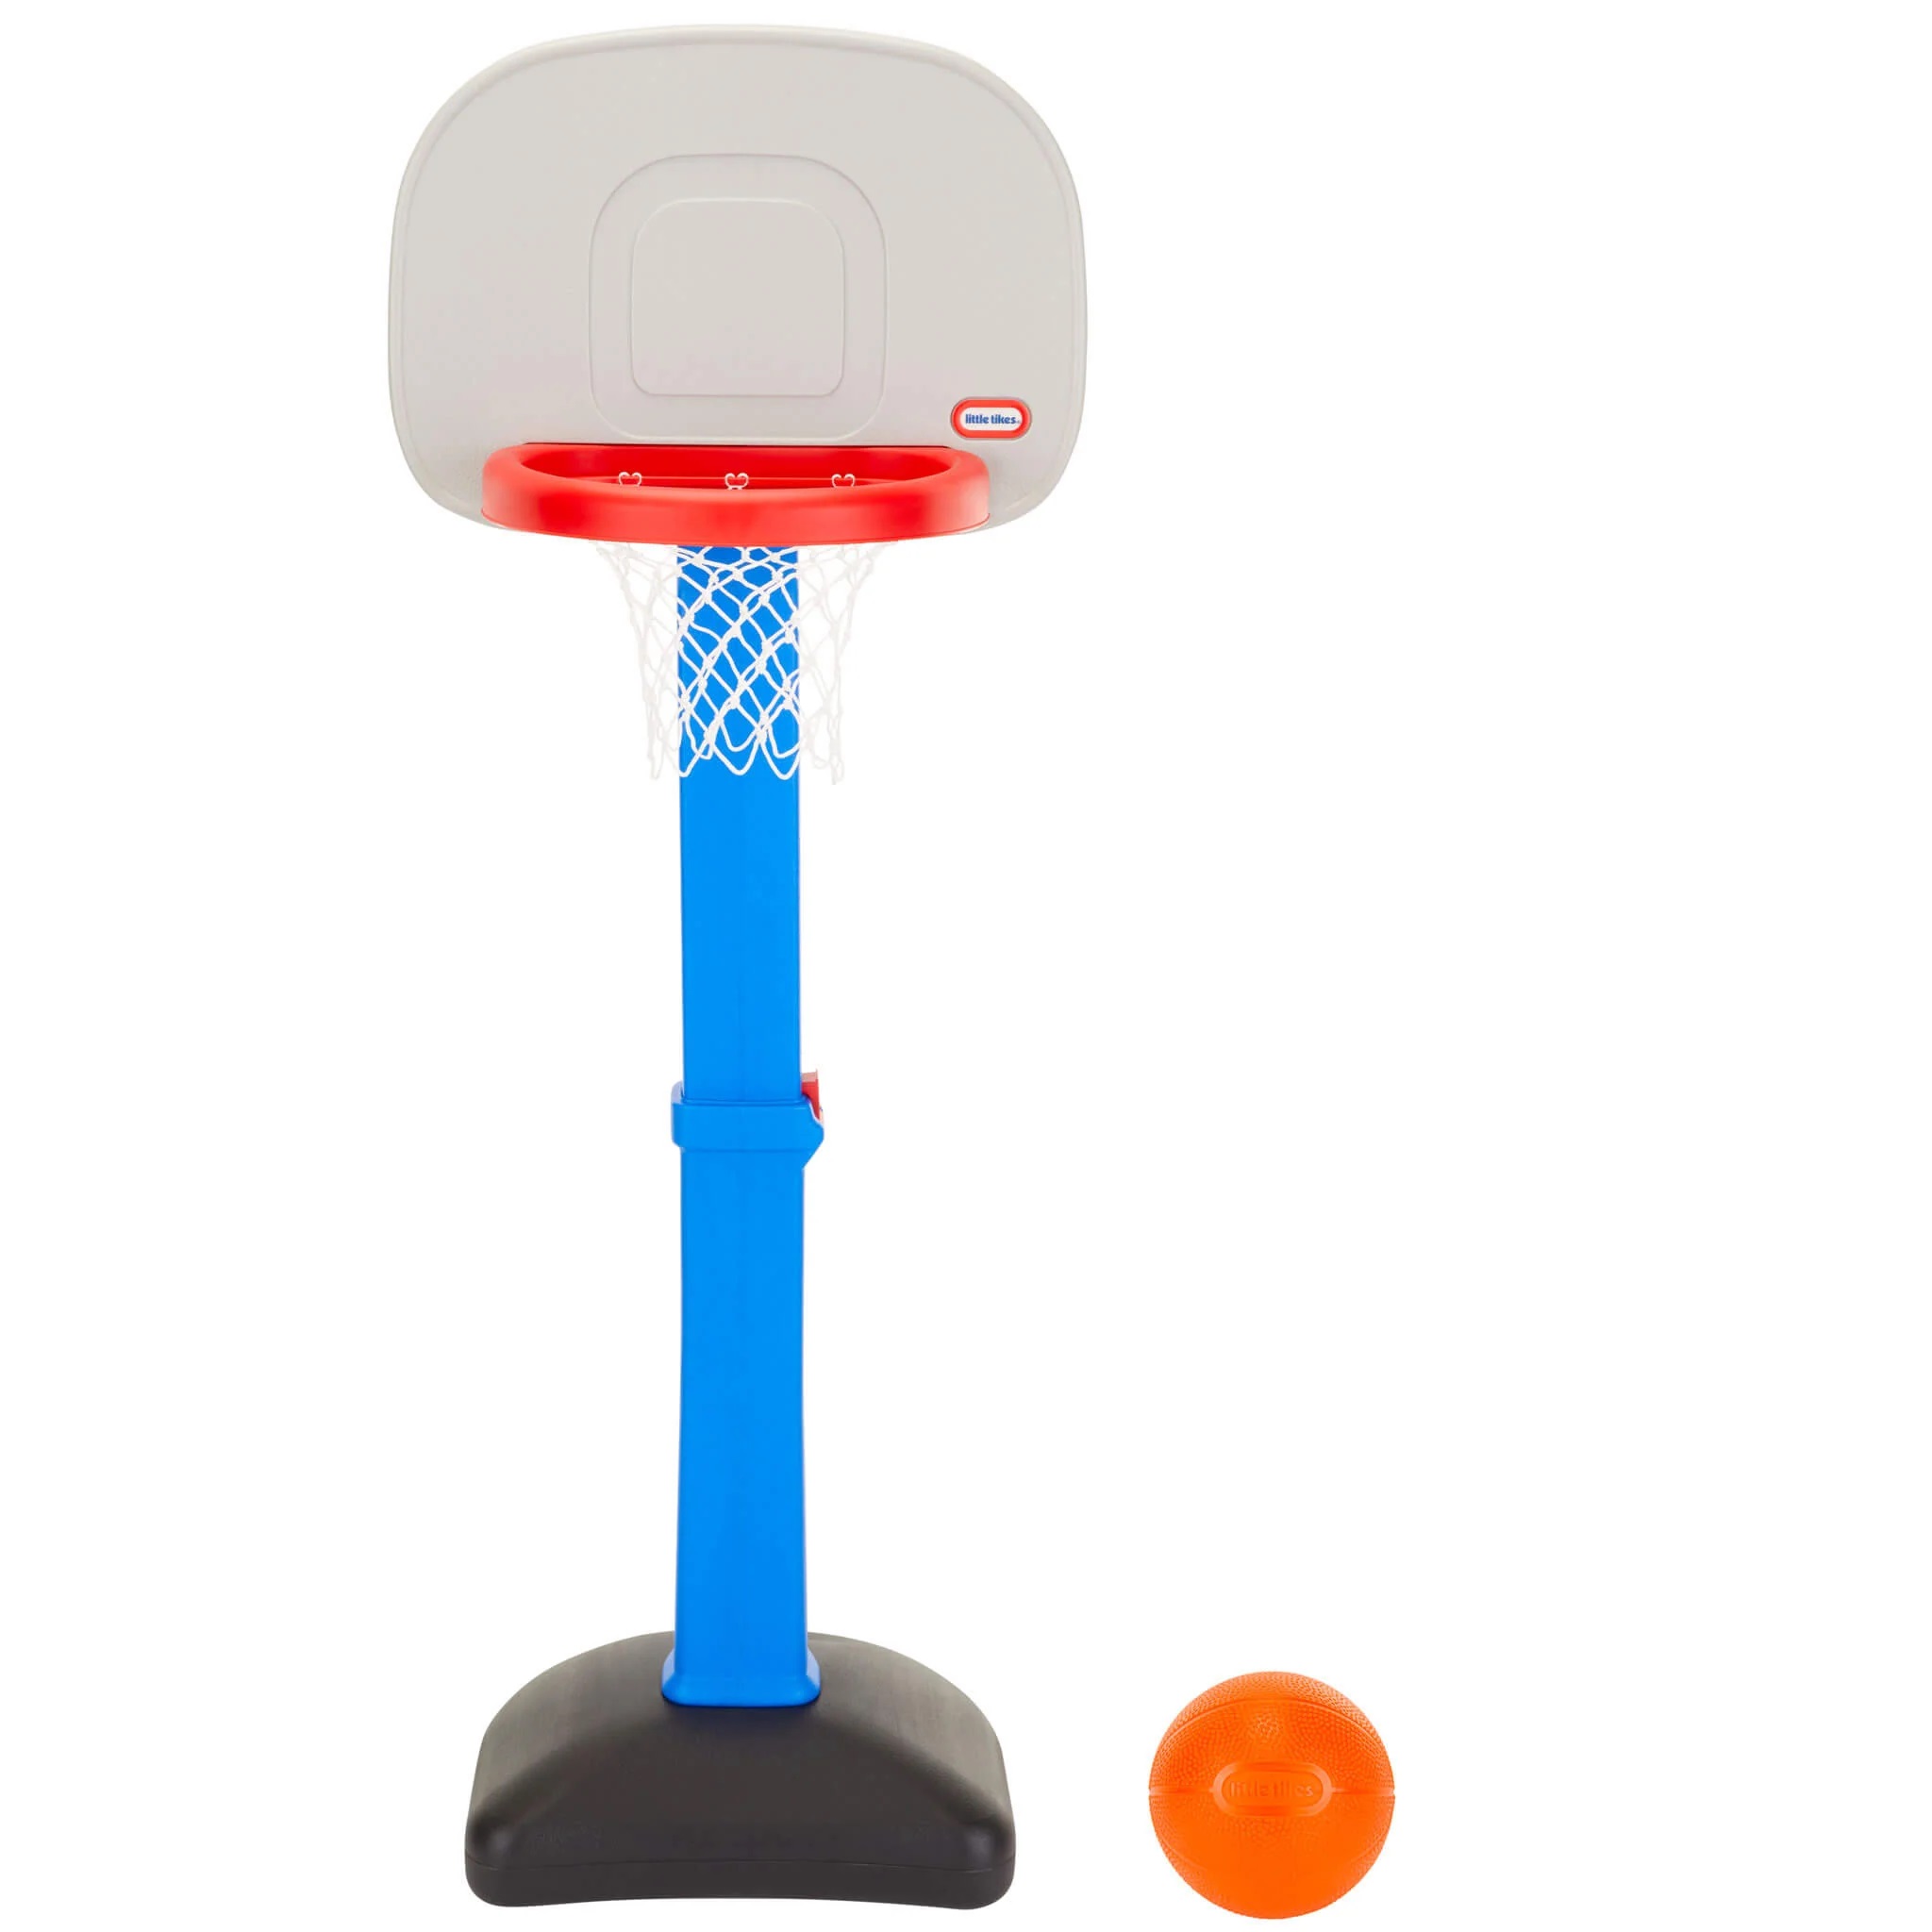 Little Tikes TotSports Easy Score Toy Basketball Hoop with Ball, Height Adjustable, Indoor Outdoor Backyard Toy Sports Play Set For Kids Girls Boys Ages 18 months to 5 Year Old, Blue - image 1 of 6